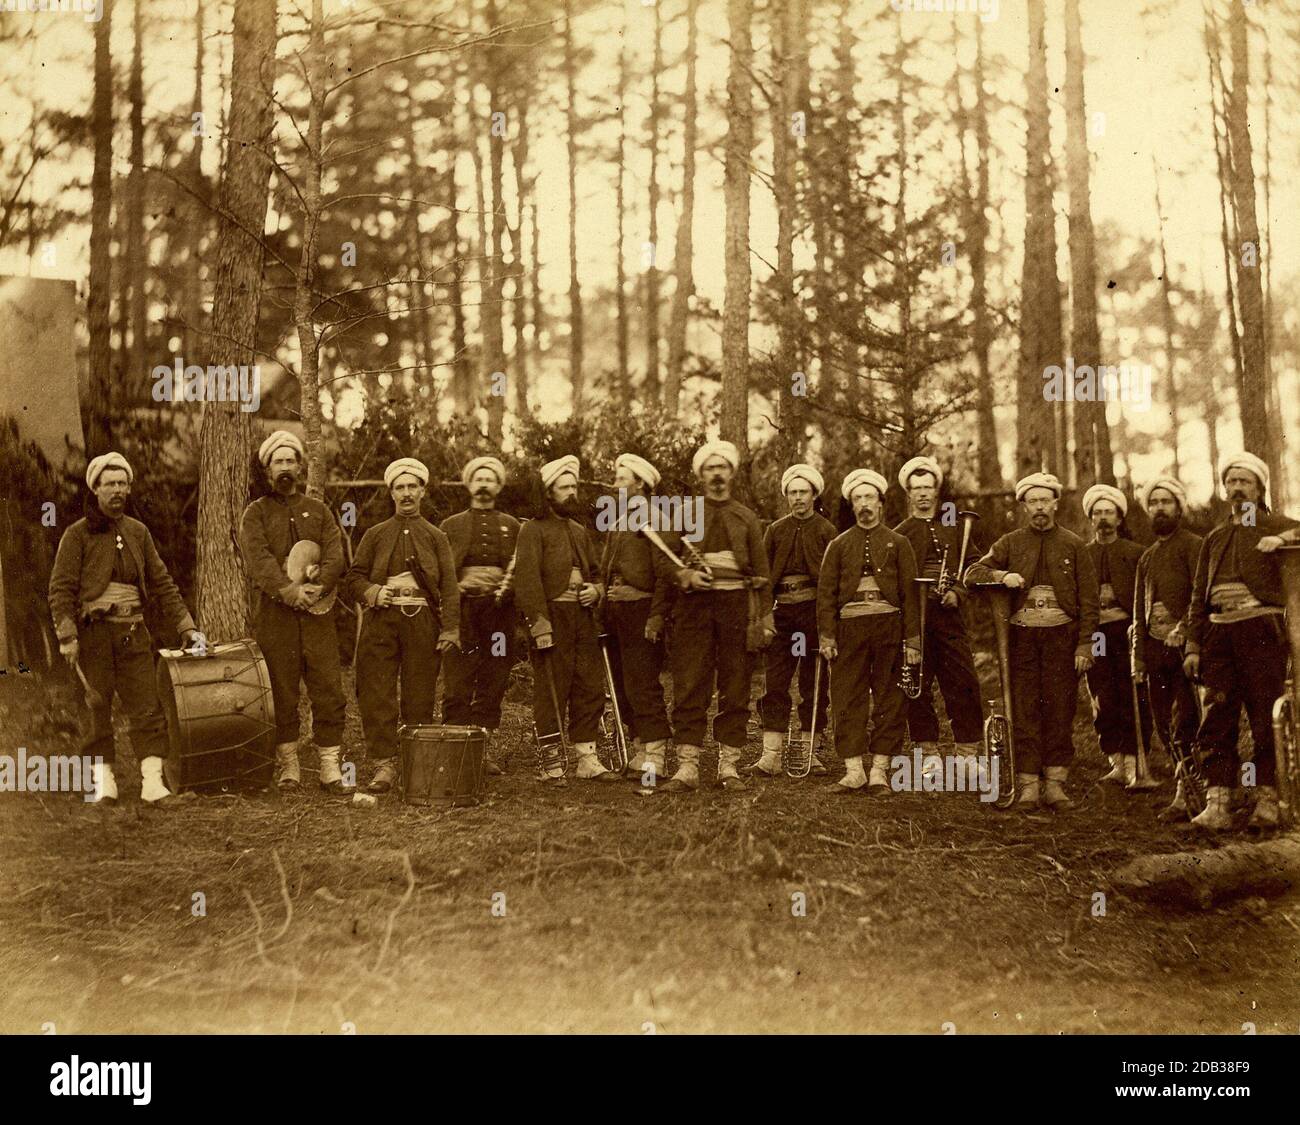 Band of 114th Pennsylvania Infantry, in front of Petersburg, Va., August, 1864; Group portrait of 14 men in Zouave uniforms; posed with musical instruments.. Stock Photo